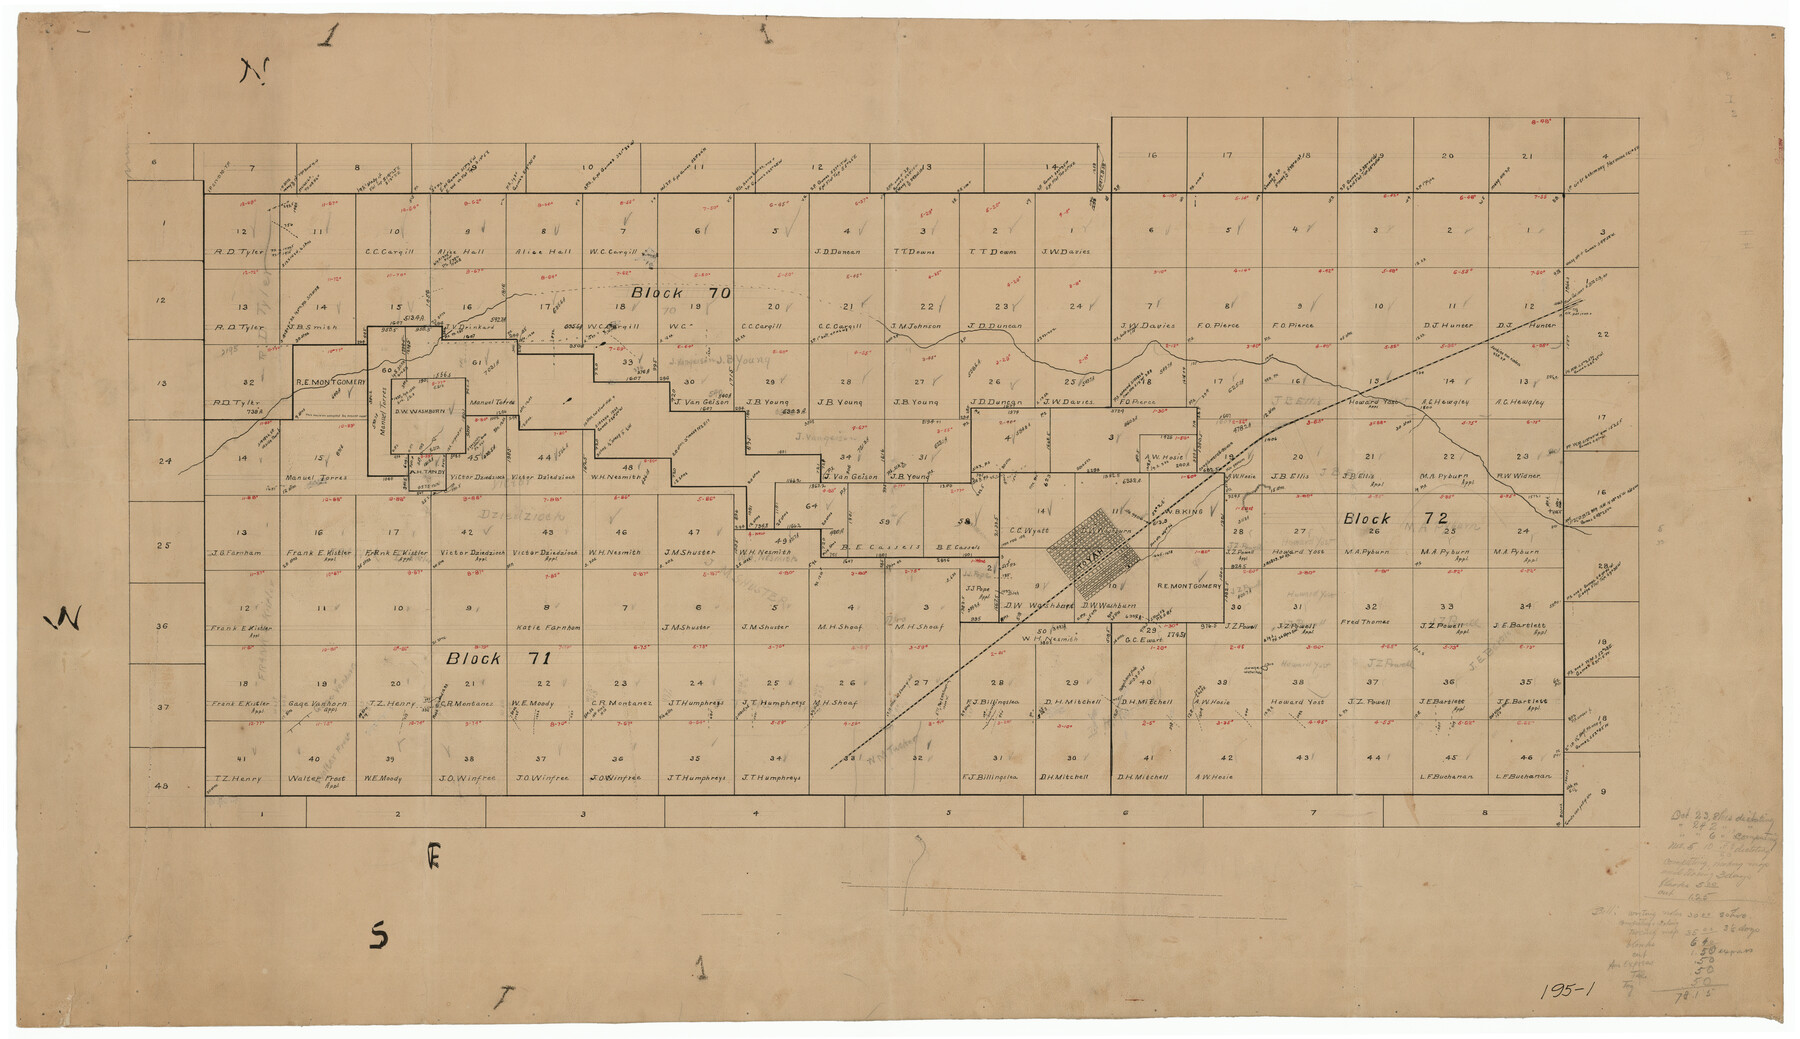 91750, [Sketch showing surveys in Blocks 70, 71 and 72 surrounding the town of Toyah], Twichell Survey Records